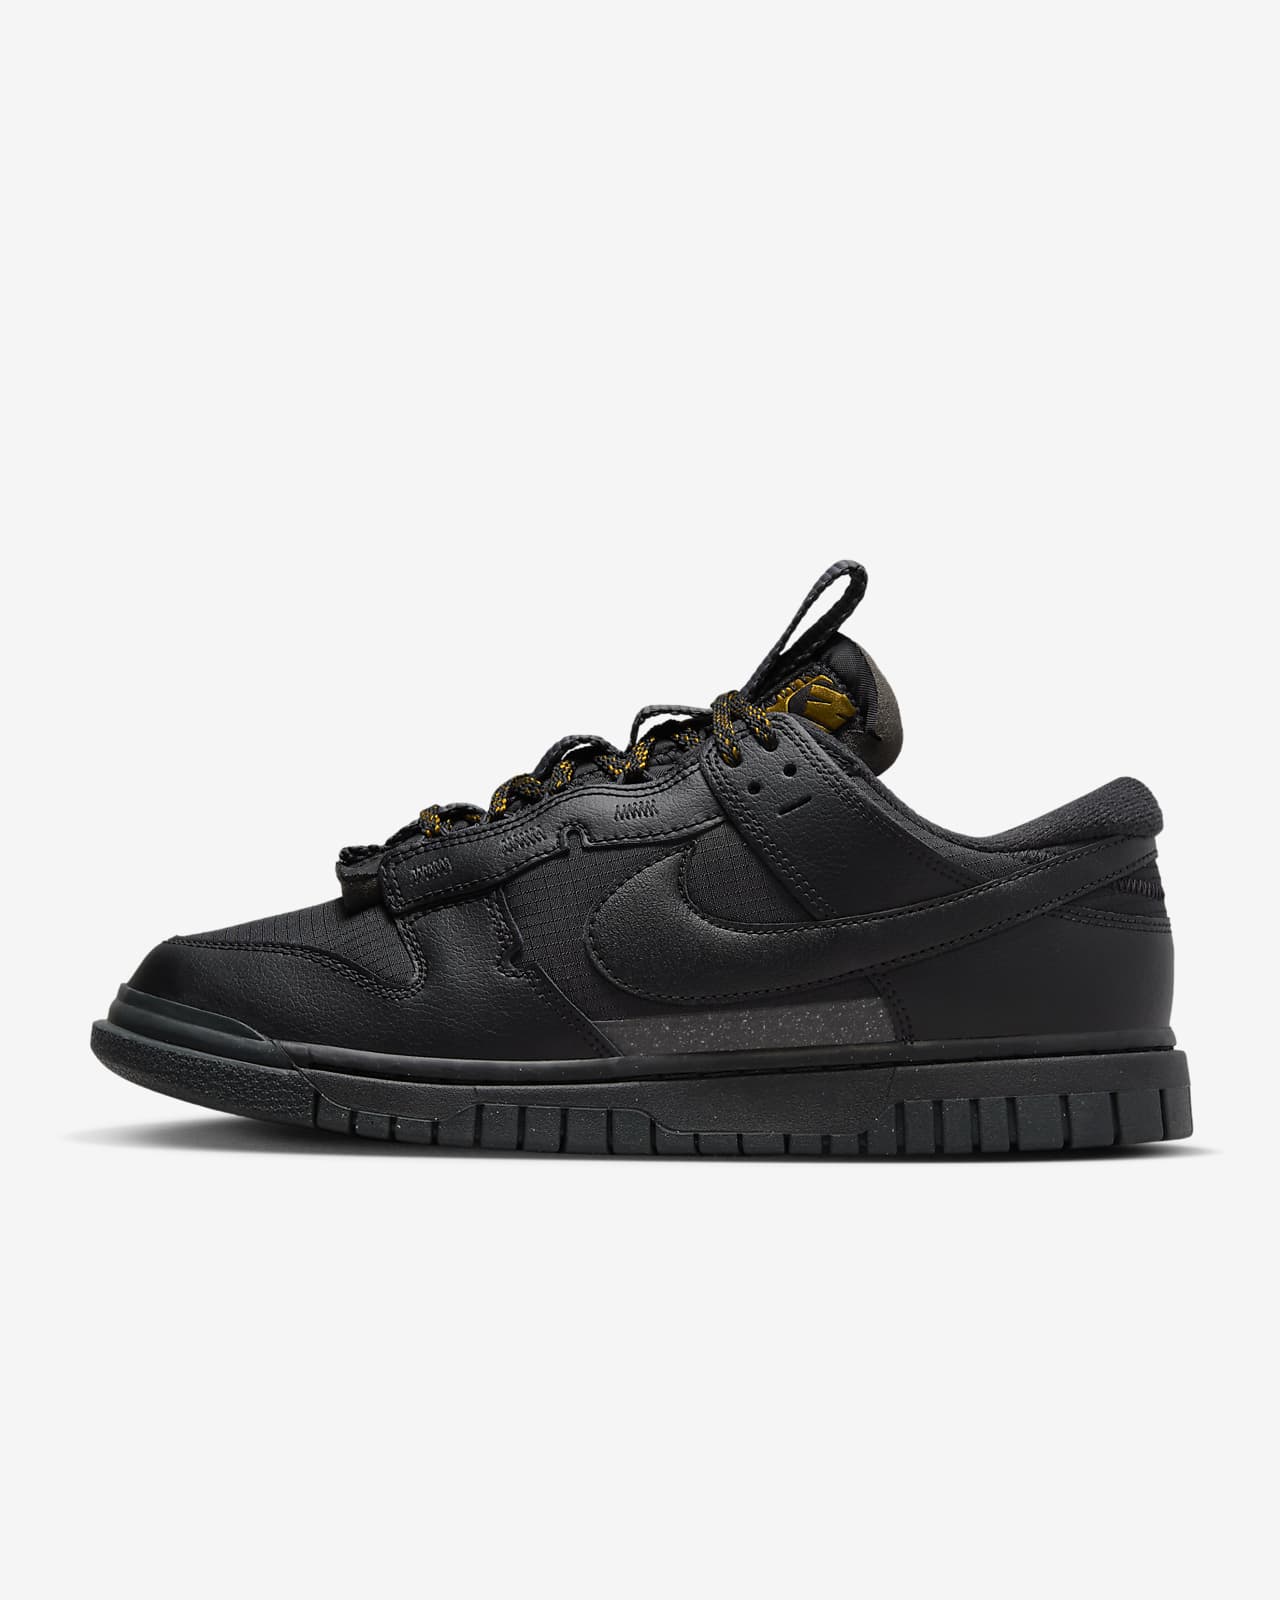 Buy Dunk Low 'Anthracite' - FV0384 001